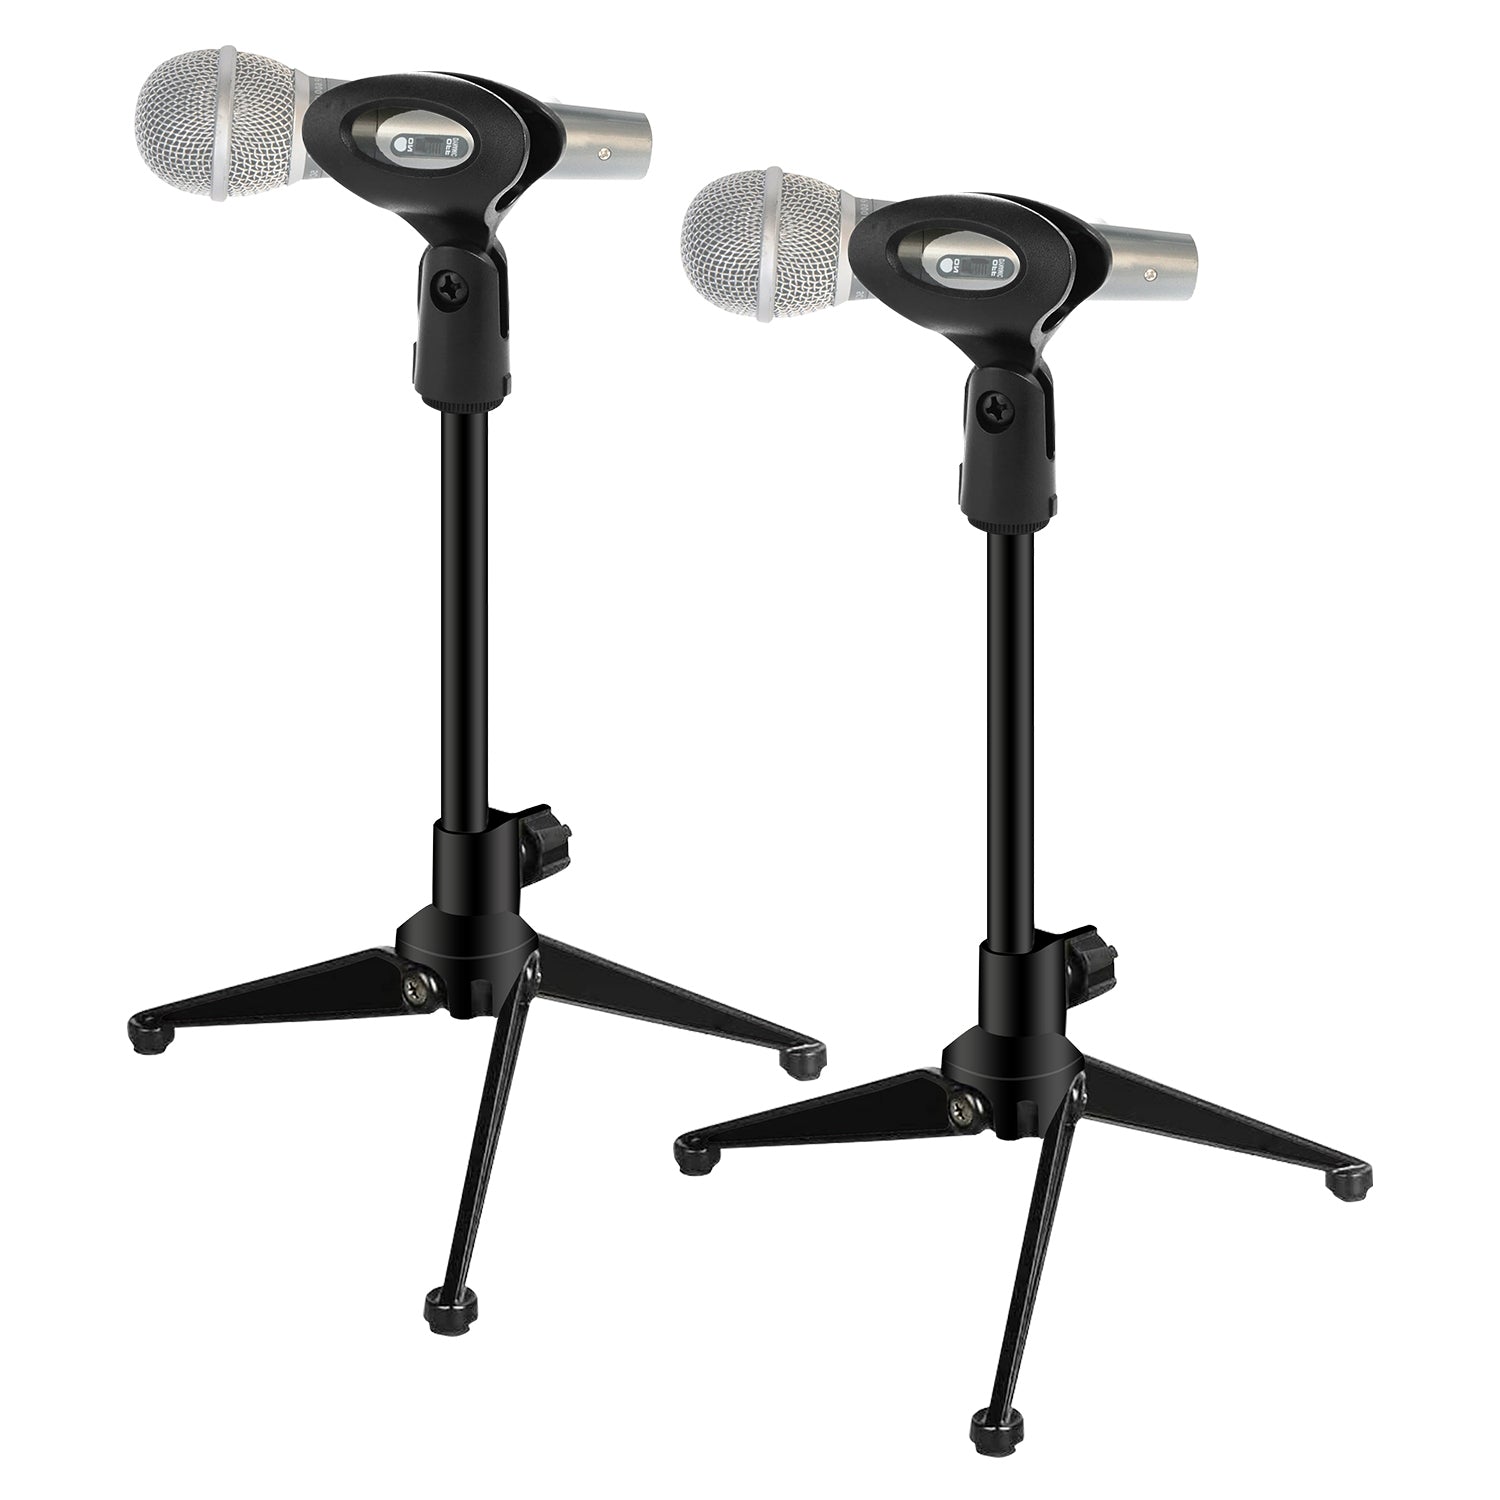 5 Core Mic Stand Desk Adjustable Desktop Tripod Microphone Stand 2 Pack w/ Mic Clip/ for Recording